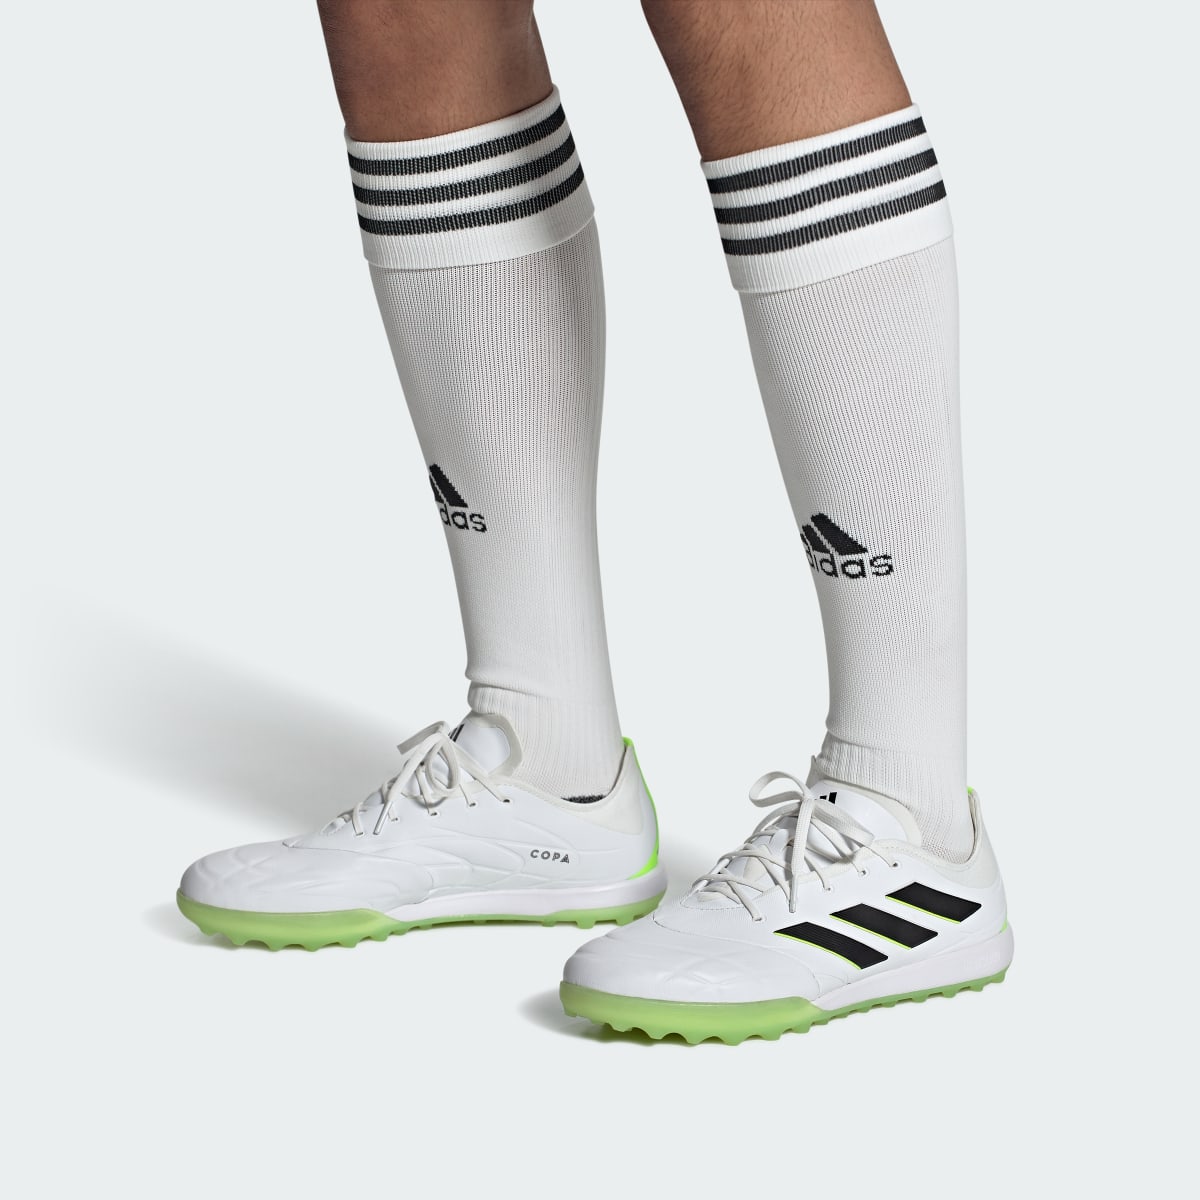 Adidas Copa Pure.1 Turf Boots. 5